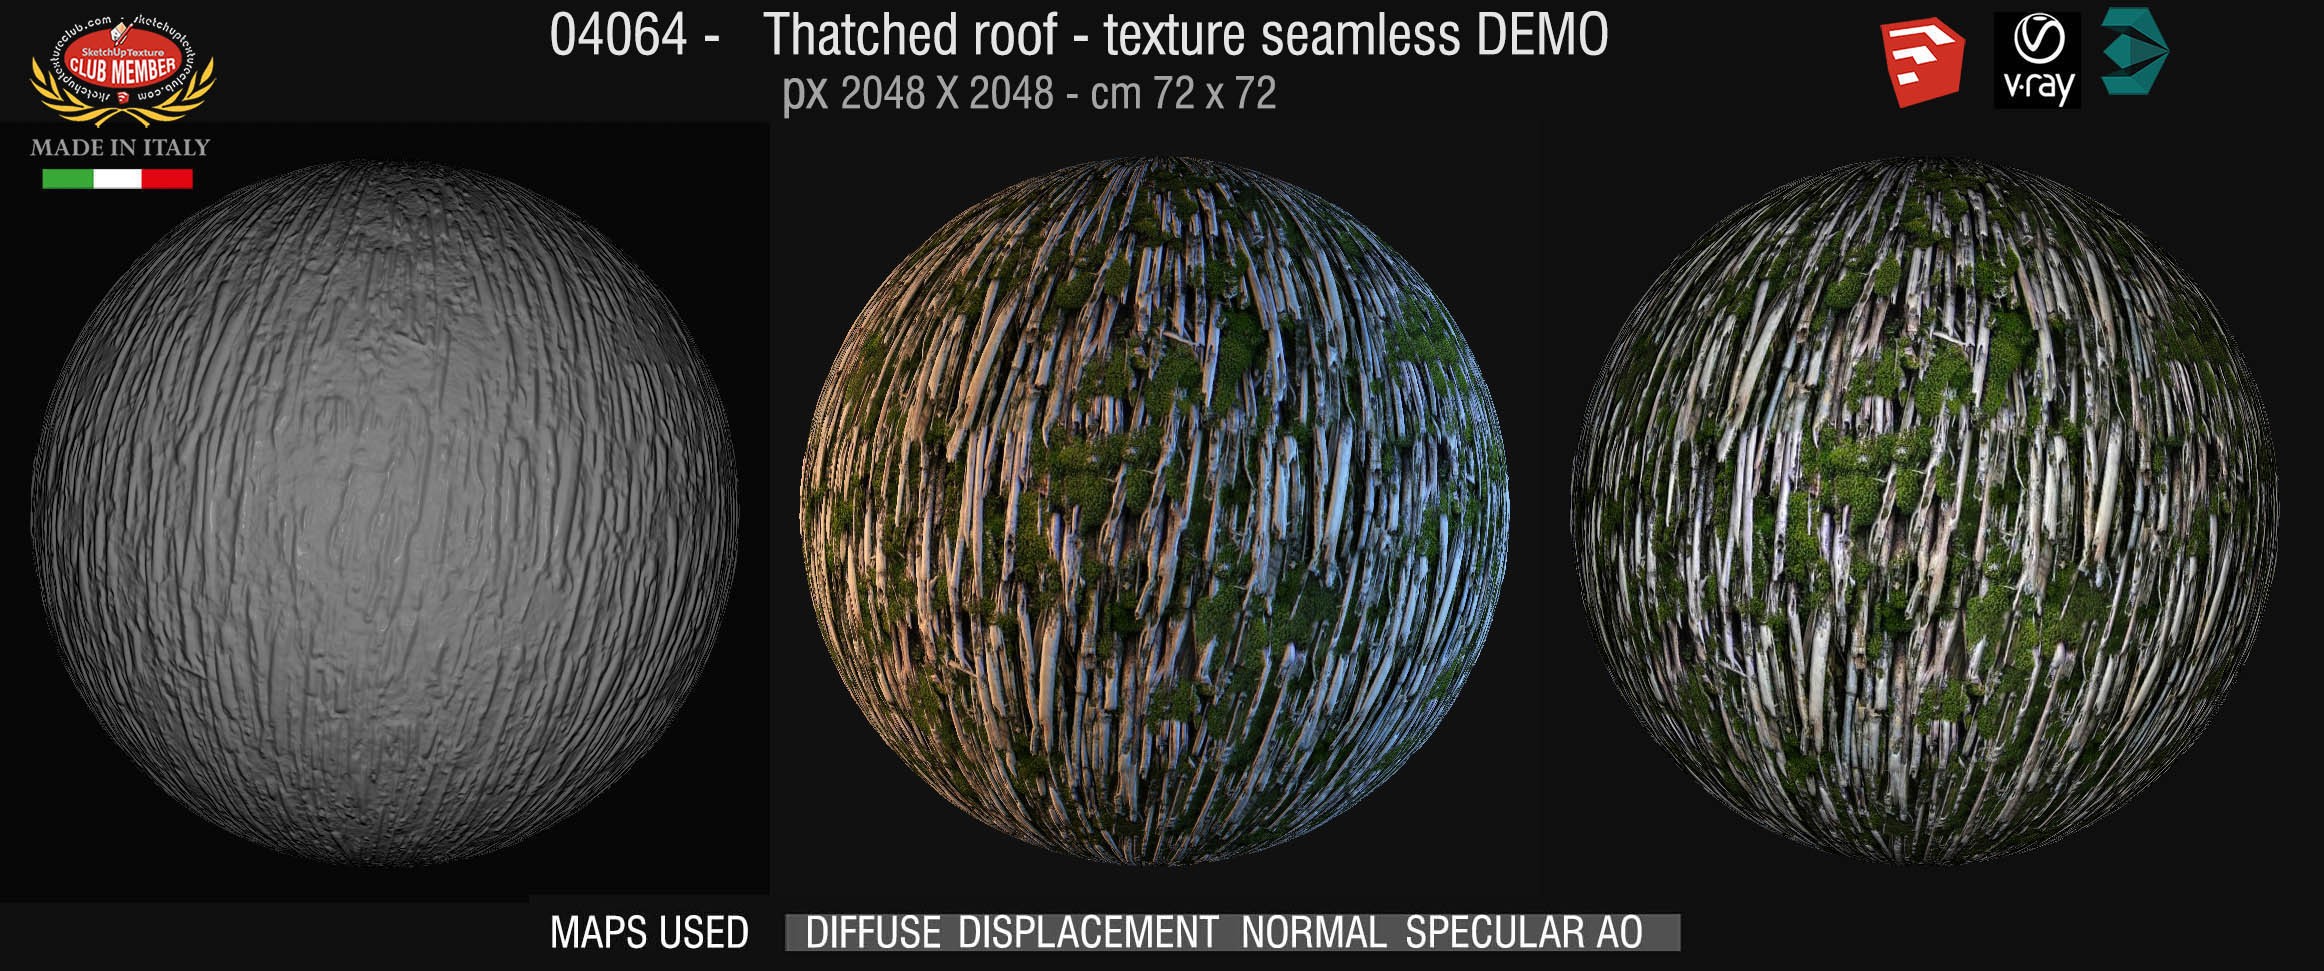 04064 Thatched roof texture seamless + maps DEMO